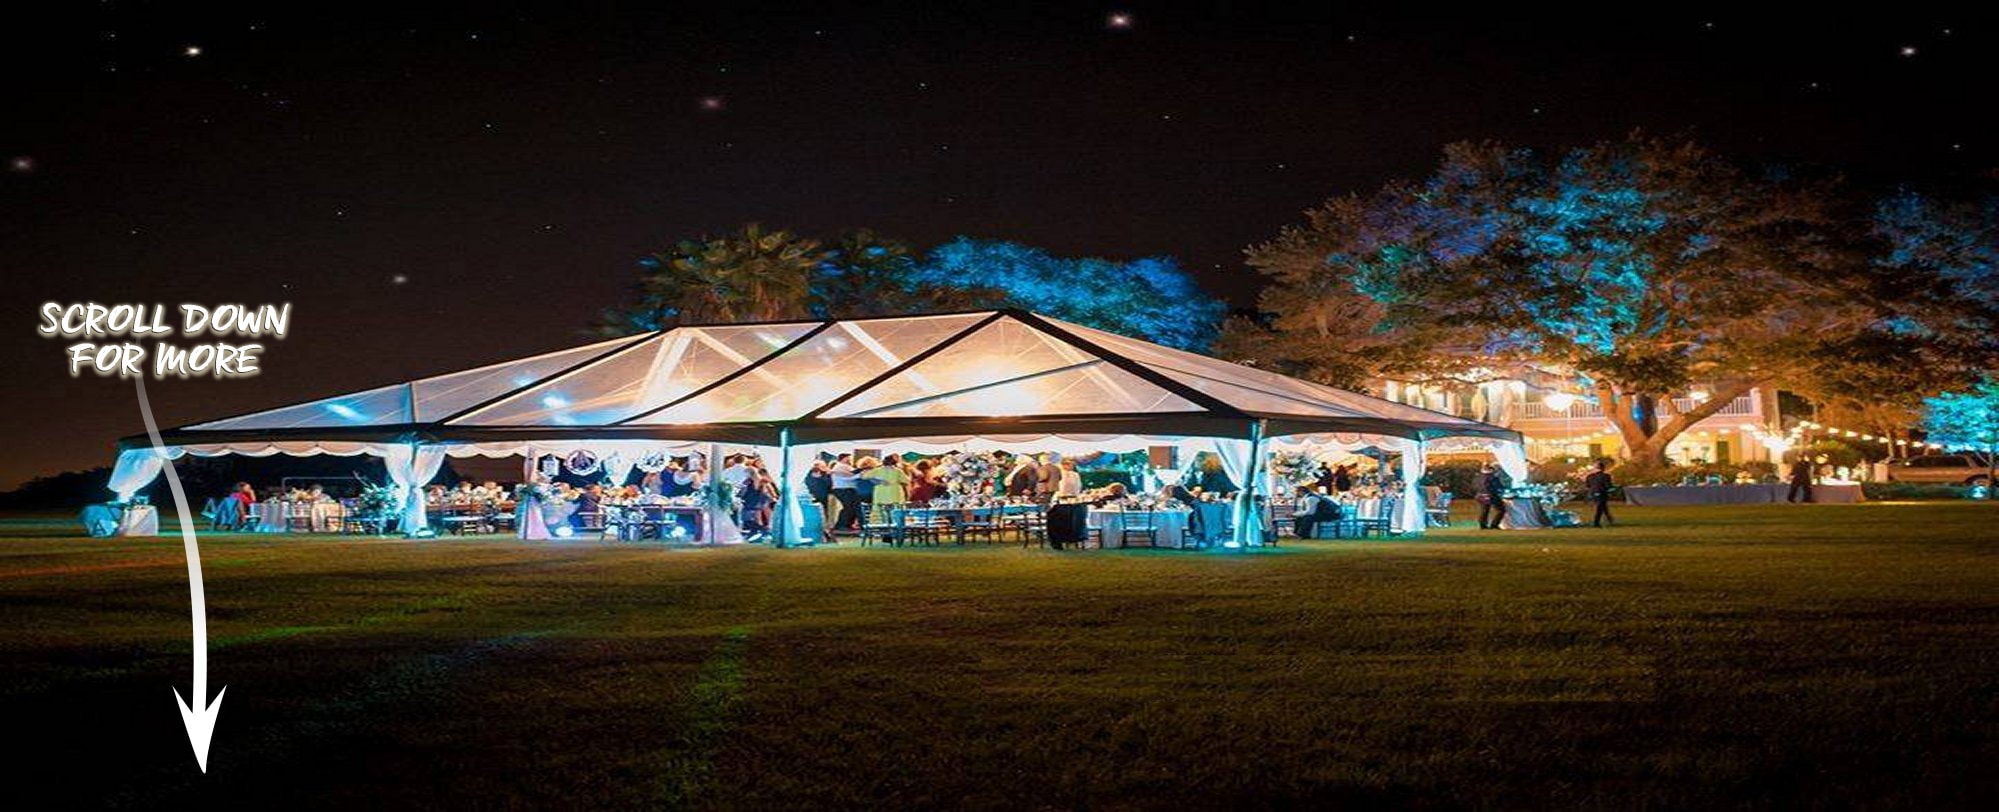 When you have your wedding at one of our homes, we provide referrals for tents, tables, chairs, catering, and more